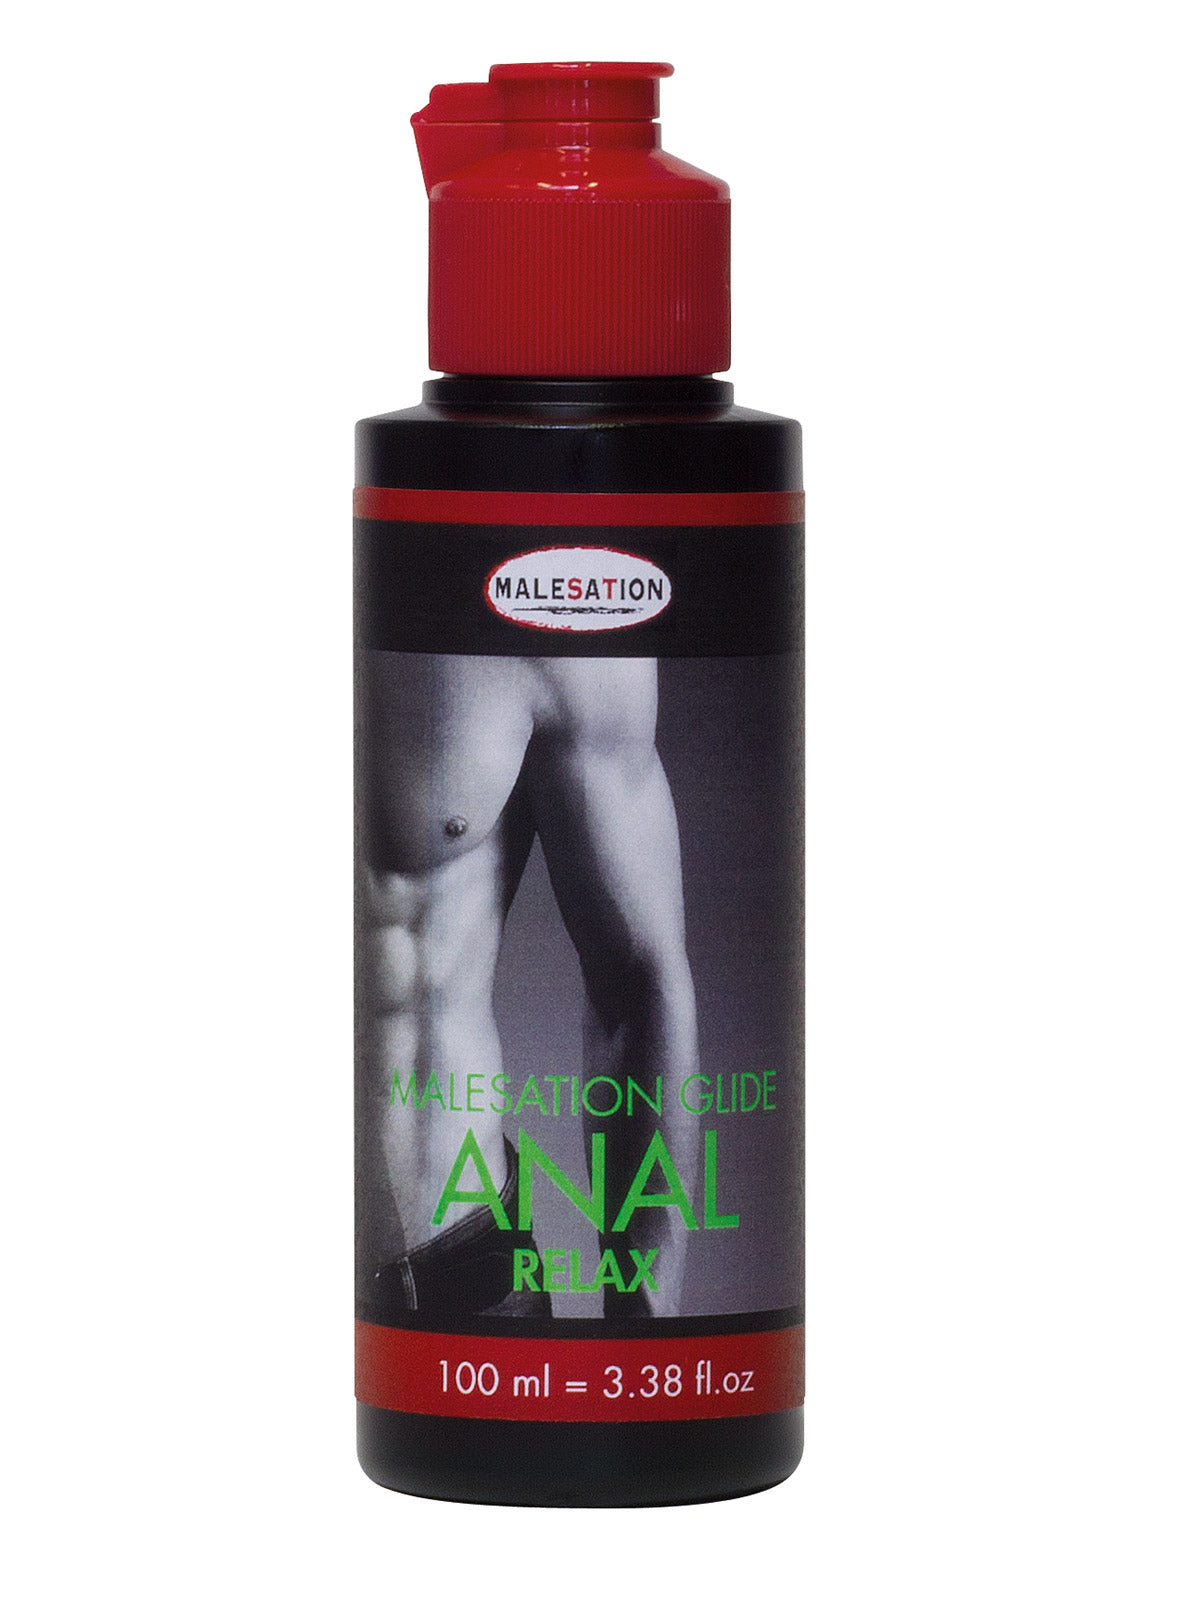 Malesation Glide Anal Relax is a Water-Based Lube